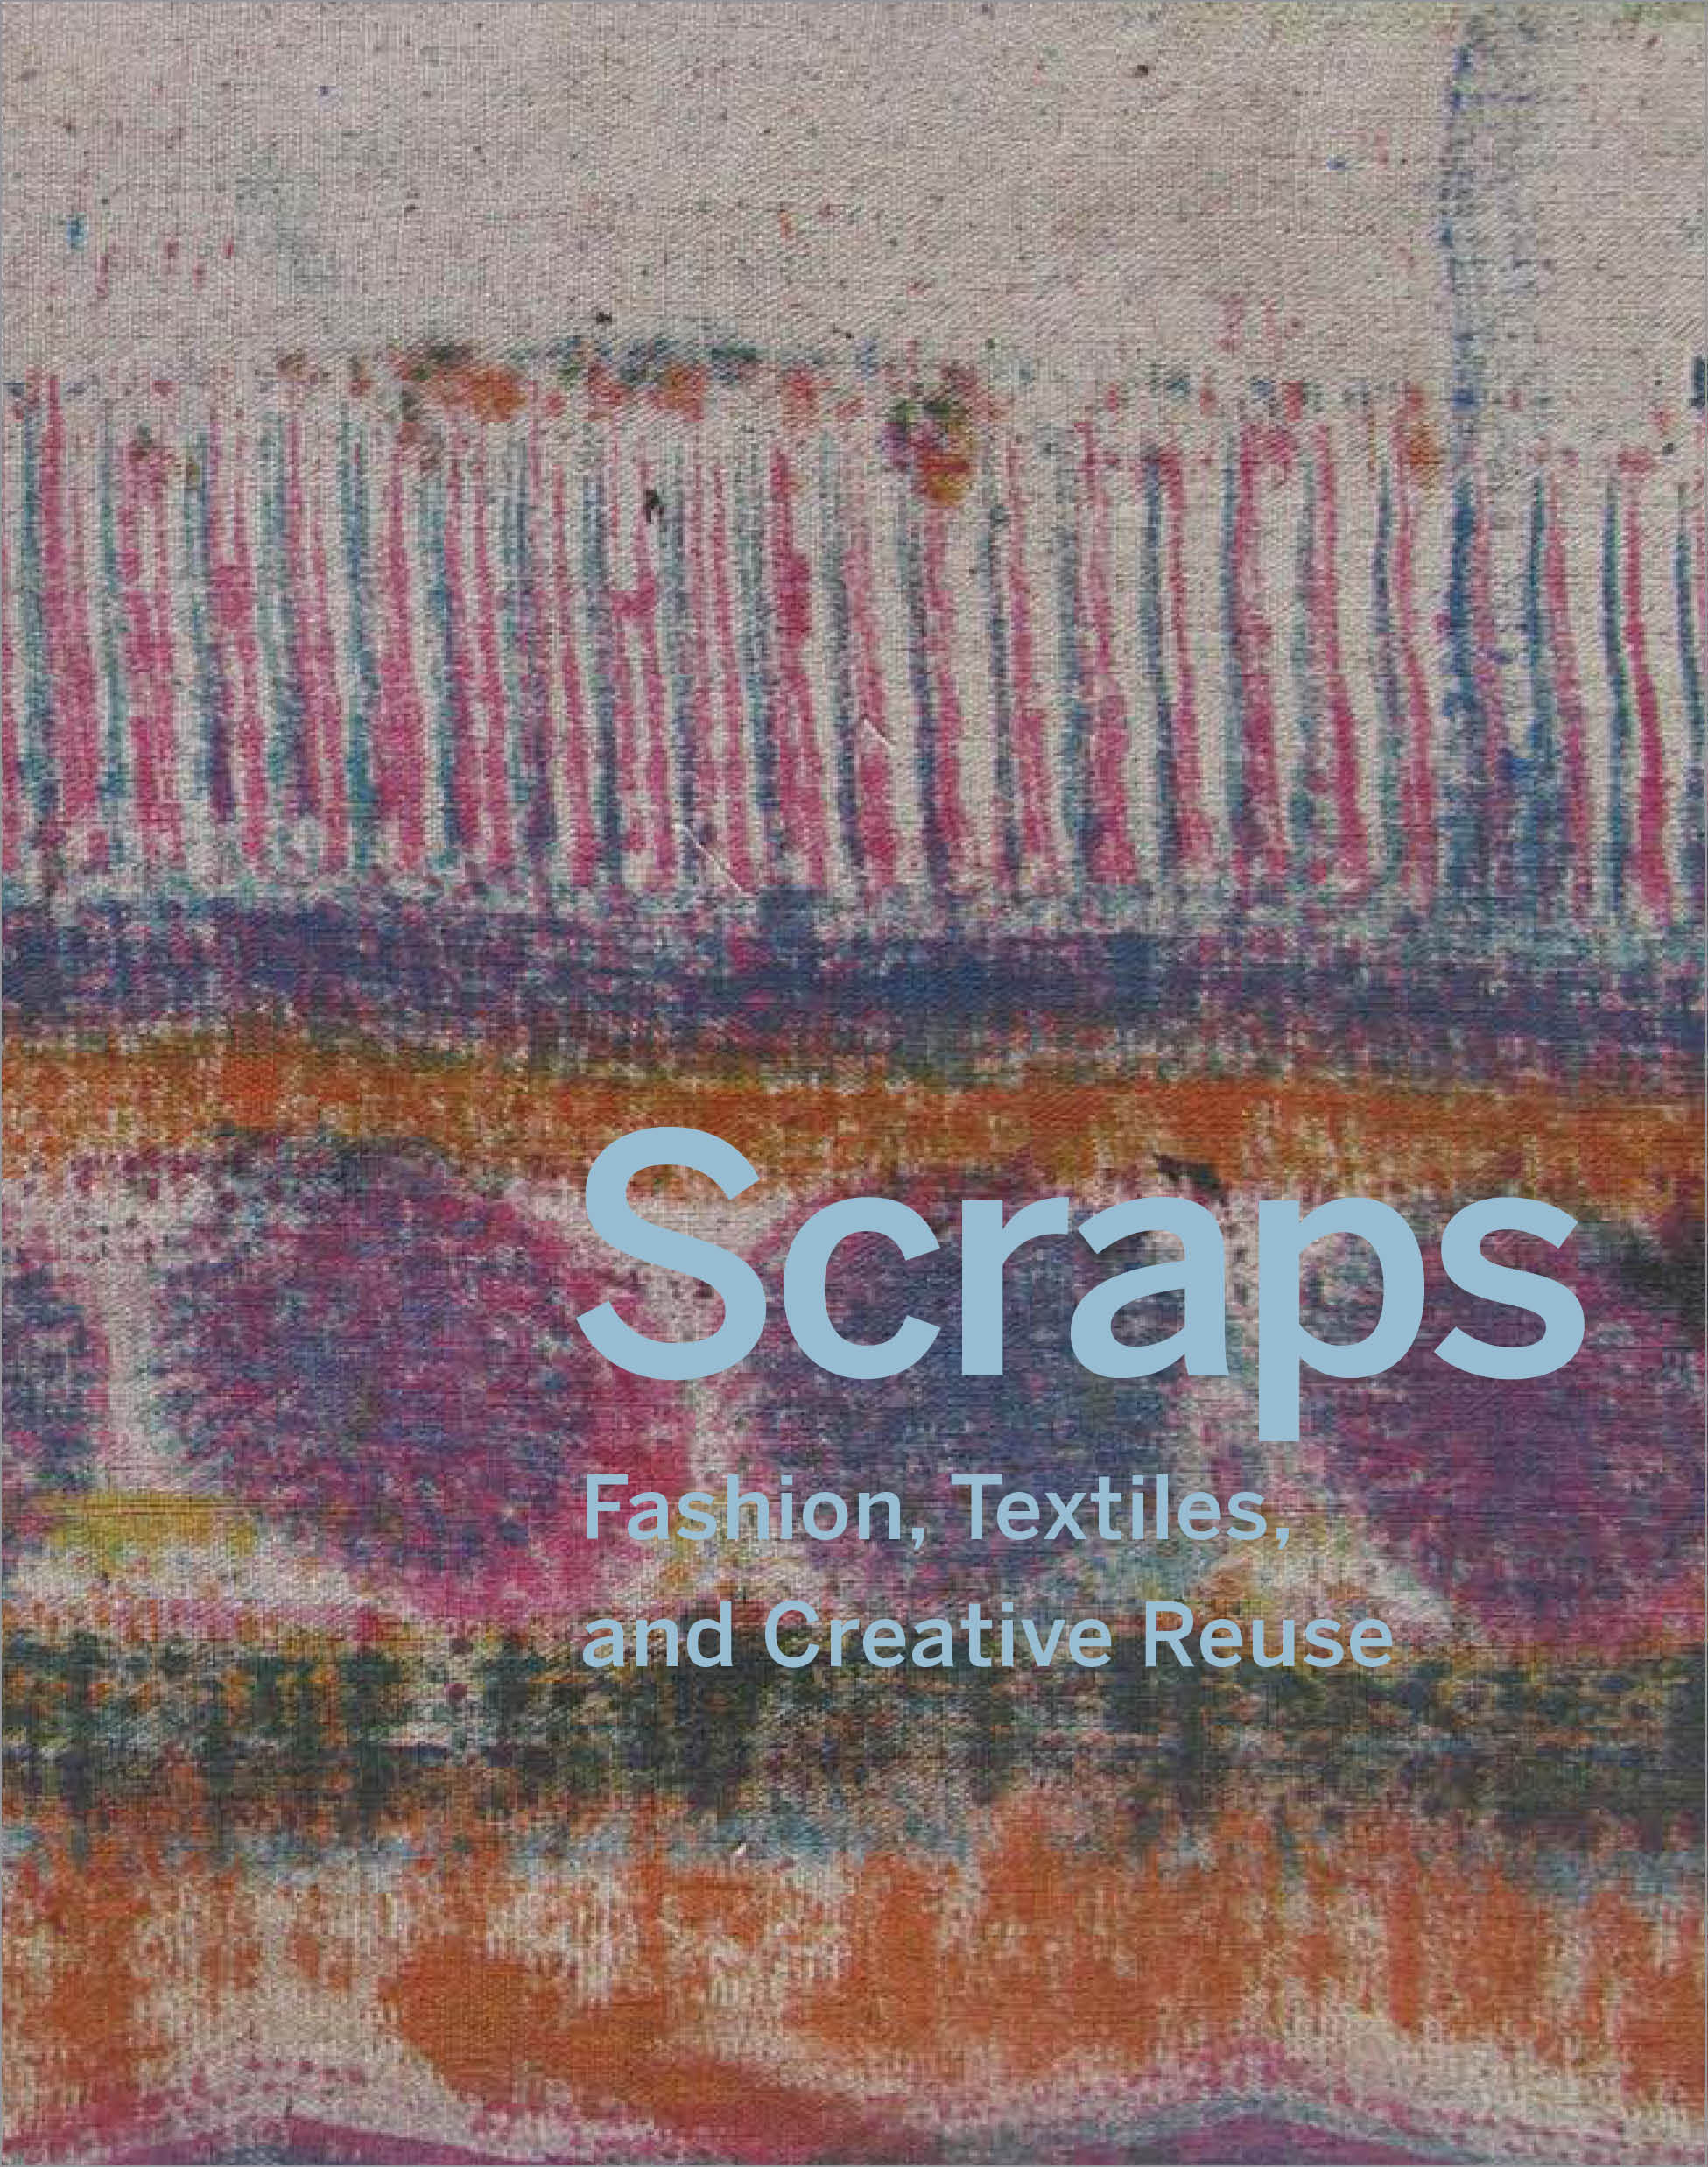 Scraps: Fashion, Textiles, and Creative Reuse | Cooper Hewitt ...